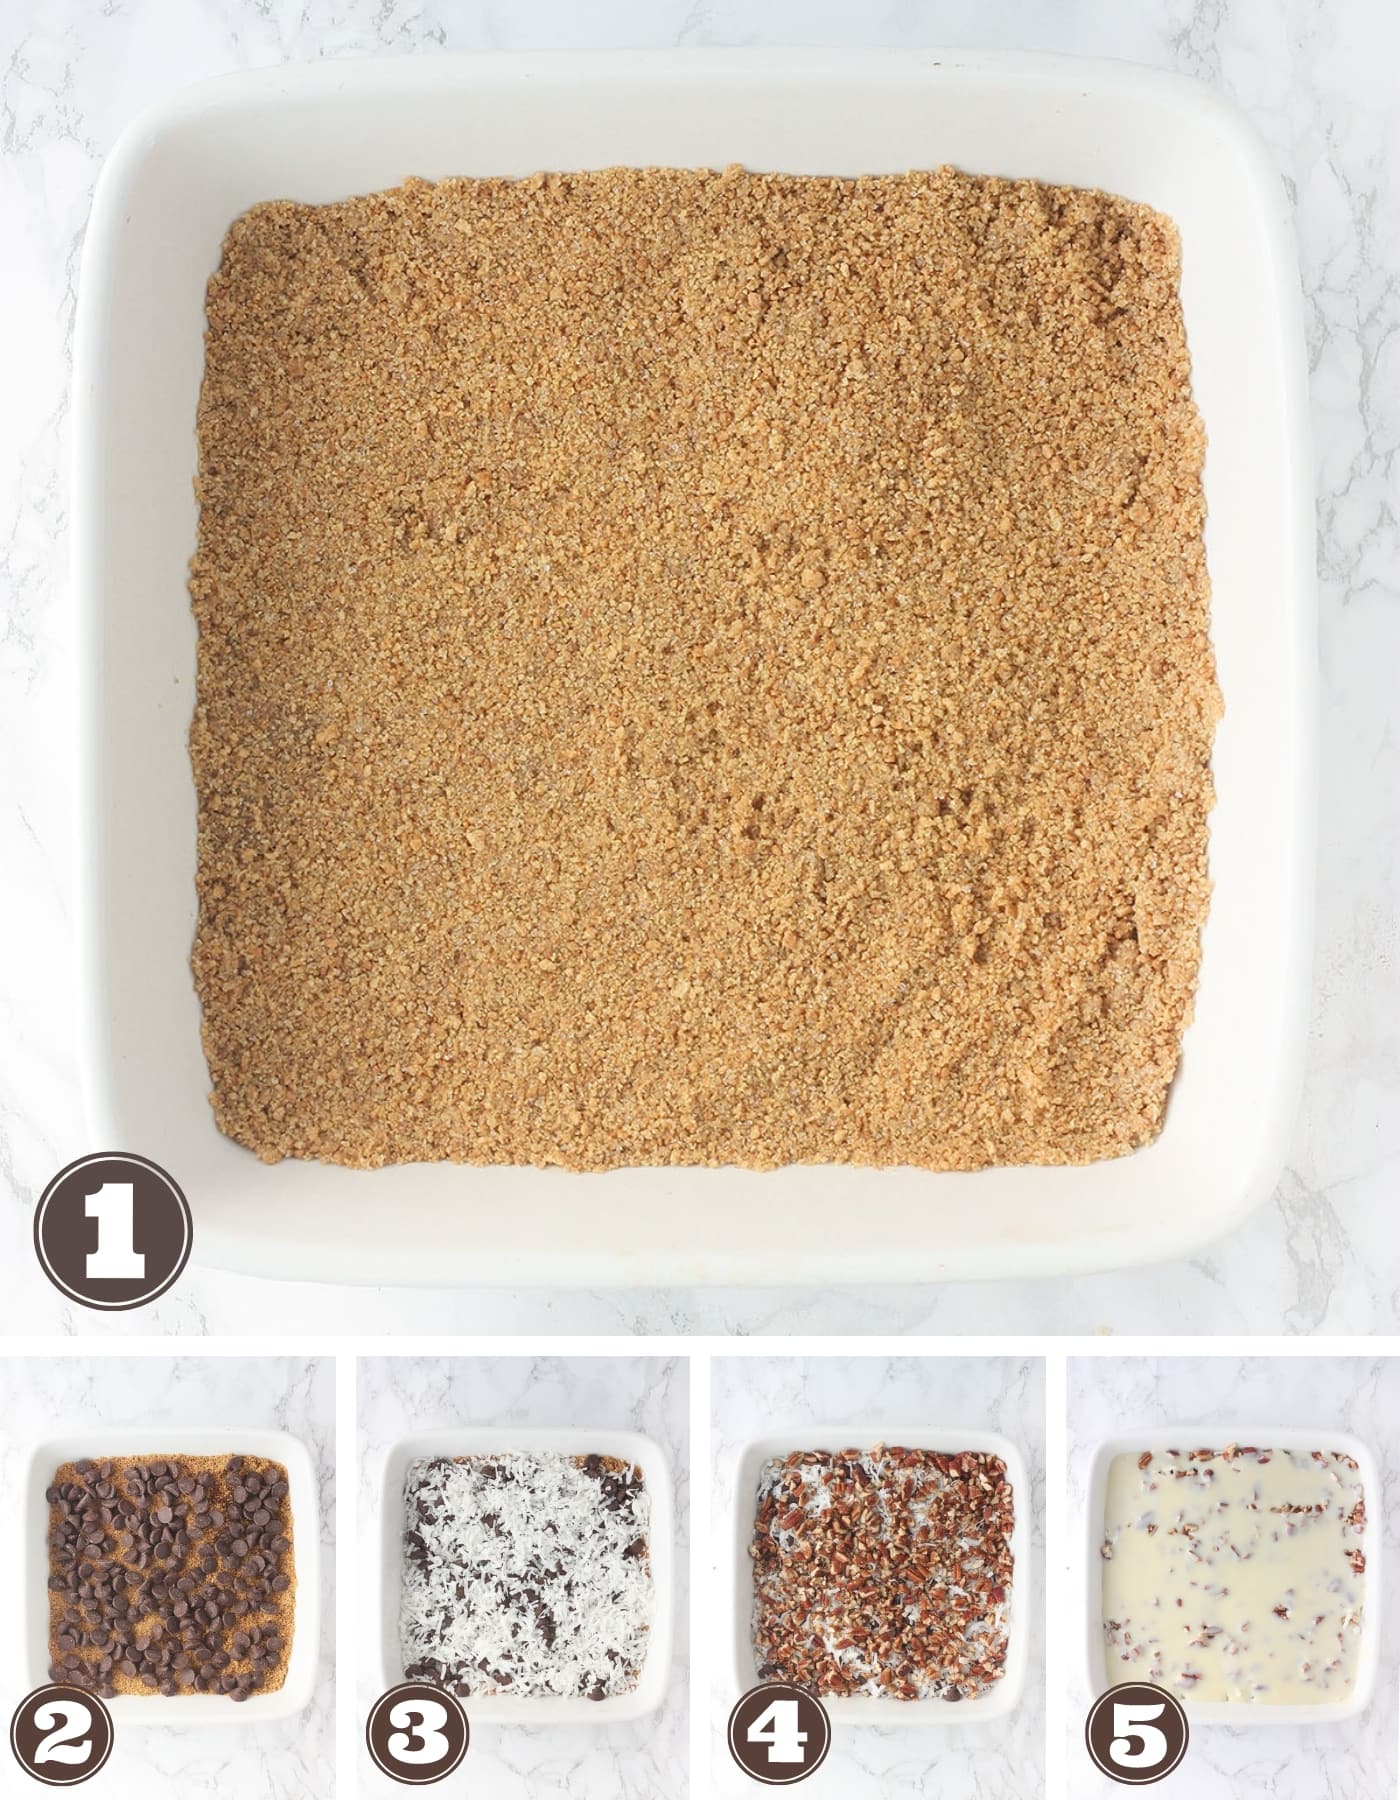 Five steps to assemble Hello Dolly Bars - graham cracker crust, chocolate chips, shredded coconut, chopped pecans and condensed milk